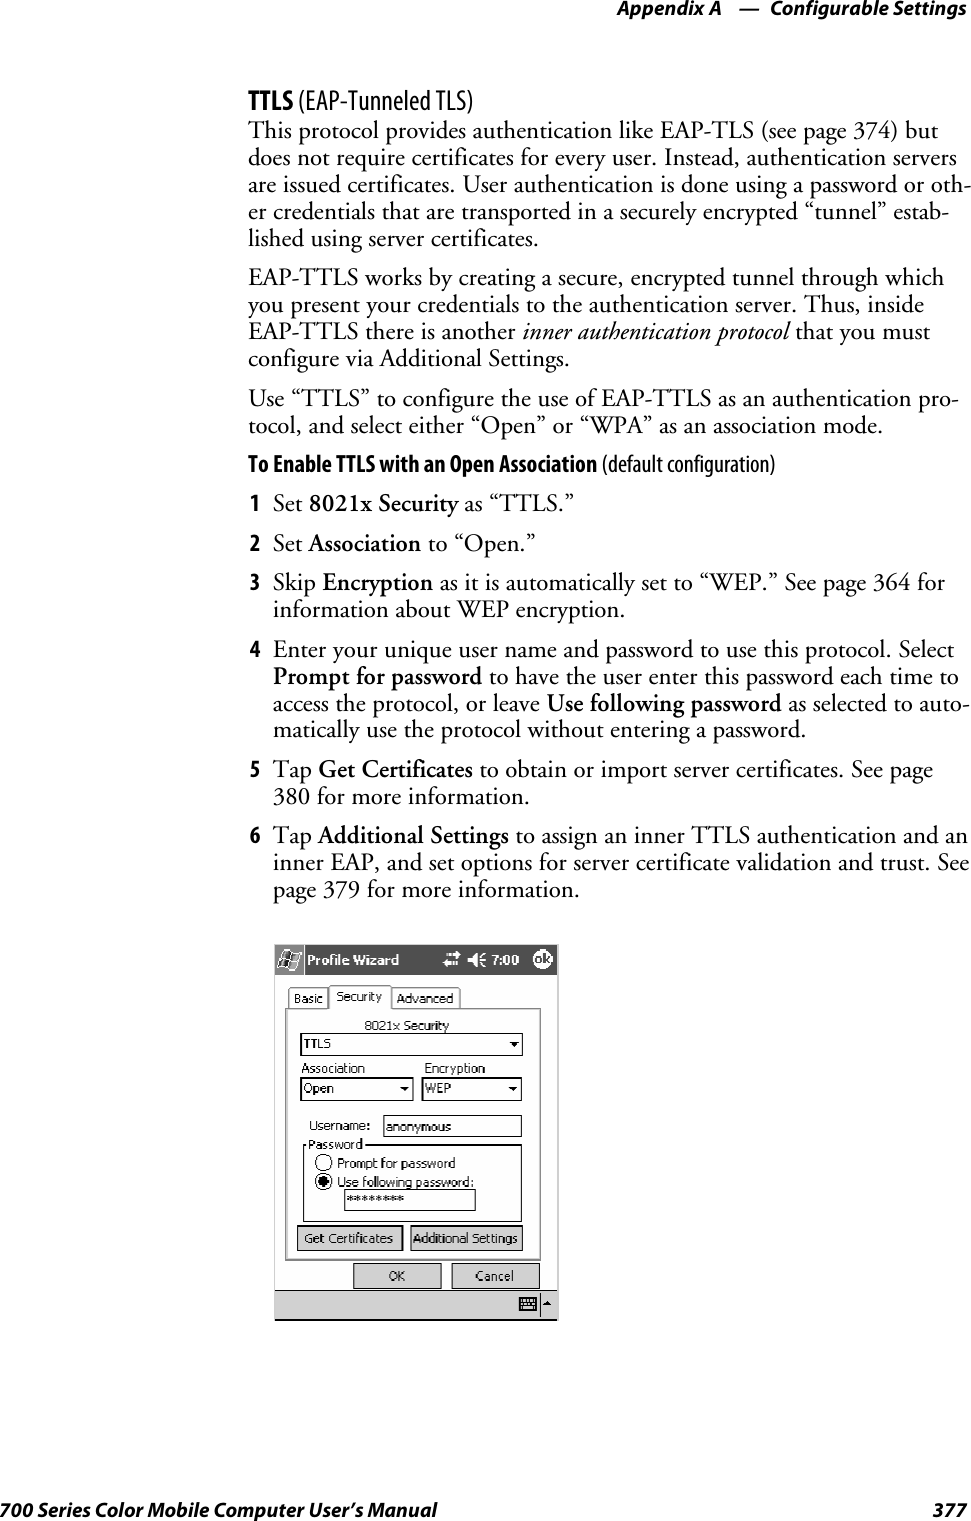 Configurable SettingsAppendix —A377700 Series Color Mobile Computer User’s ManualTTLS (EAP-Tunneled TLS)This protocol provides authentication like EAP-TLS (see page 374) butdoes not require certificates for every user. Instead, authentication serversare issued certificates. User authentication is done using a password or oth-er credentials that are transported in a securely encrypted “tunnel” estab-lished using server certificates.EAP-TTLS works by creating a secure, encrypted tunnel through whichyou present your credentials to the authentication server. Thus, insideEAP-TTLS there is another inner authentication protocol that you mustconfigure via Additional Settings.Use“TTLS”toconfiguretheuseofEAP-TTLSasanauthenticationpro-tocol, and select either “Open” or “WPA” as an association mode.ToEnableTTLSwithanOpenAssociation(default configuration)1Set 8021x Security as “TTLS.”2Set Association to “Open.”3Skip Encryption as it is automatically set to “WEP.” See page 364 forinformation about WEP encryption.4Enter your unique user name and password to use this protocol. SelectPrompt for password to have the user enter this password each time toaccess the protocol, or leave Use following password as selected to auto-matically use the protocol without entering a password.5Tap Get Certificates to obtain or import server certificates. See page380 for more information.6Tap Additional Settings to assign an inner TTLS authentication and aninner EAP, and set options for server certificate validation and trust. Seepage 379 for more information.